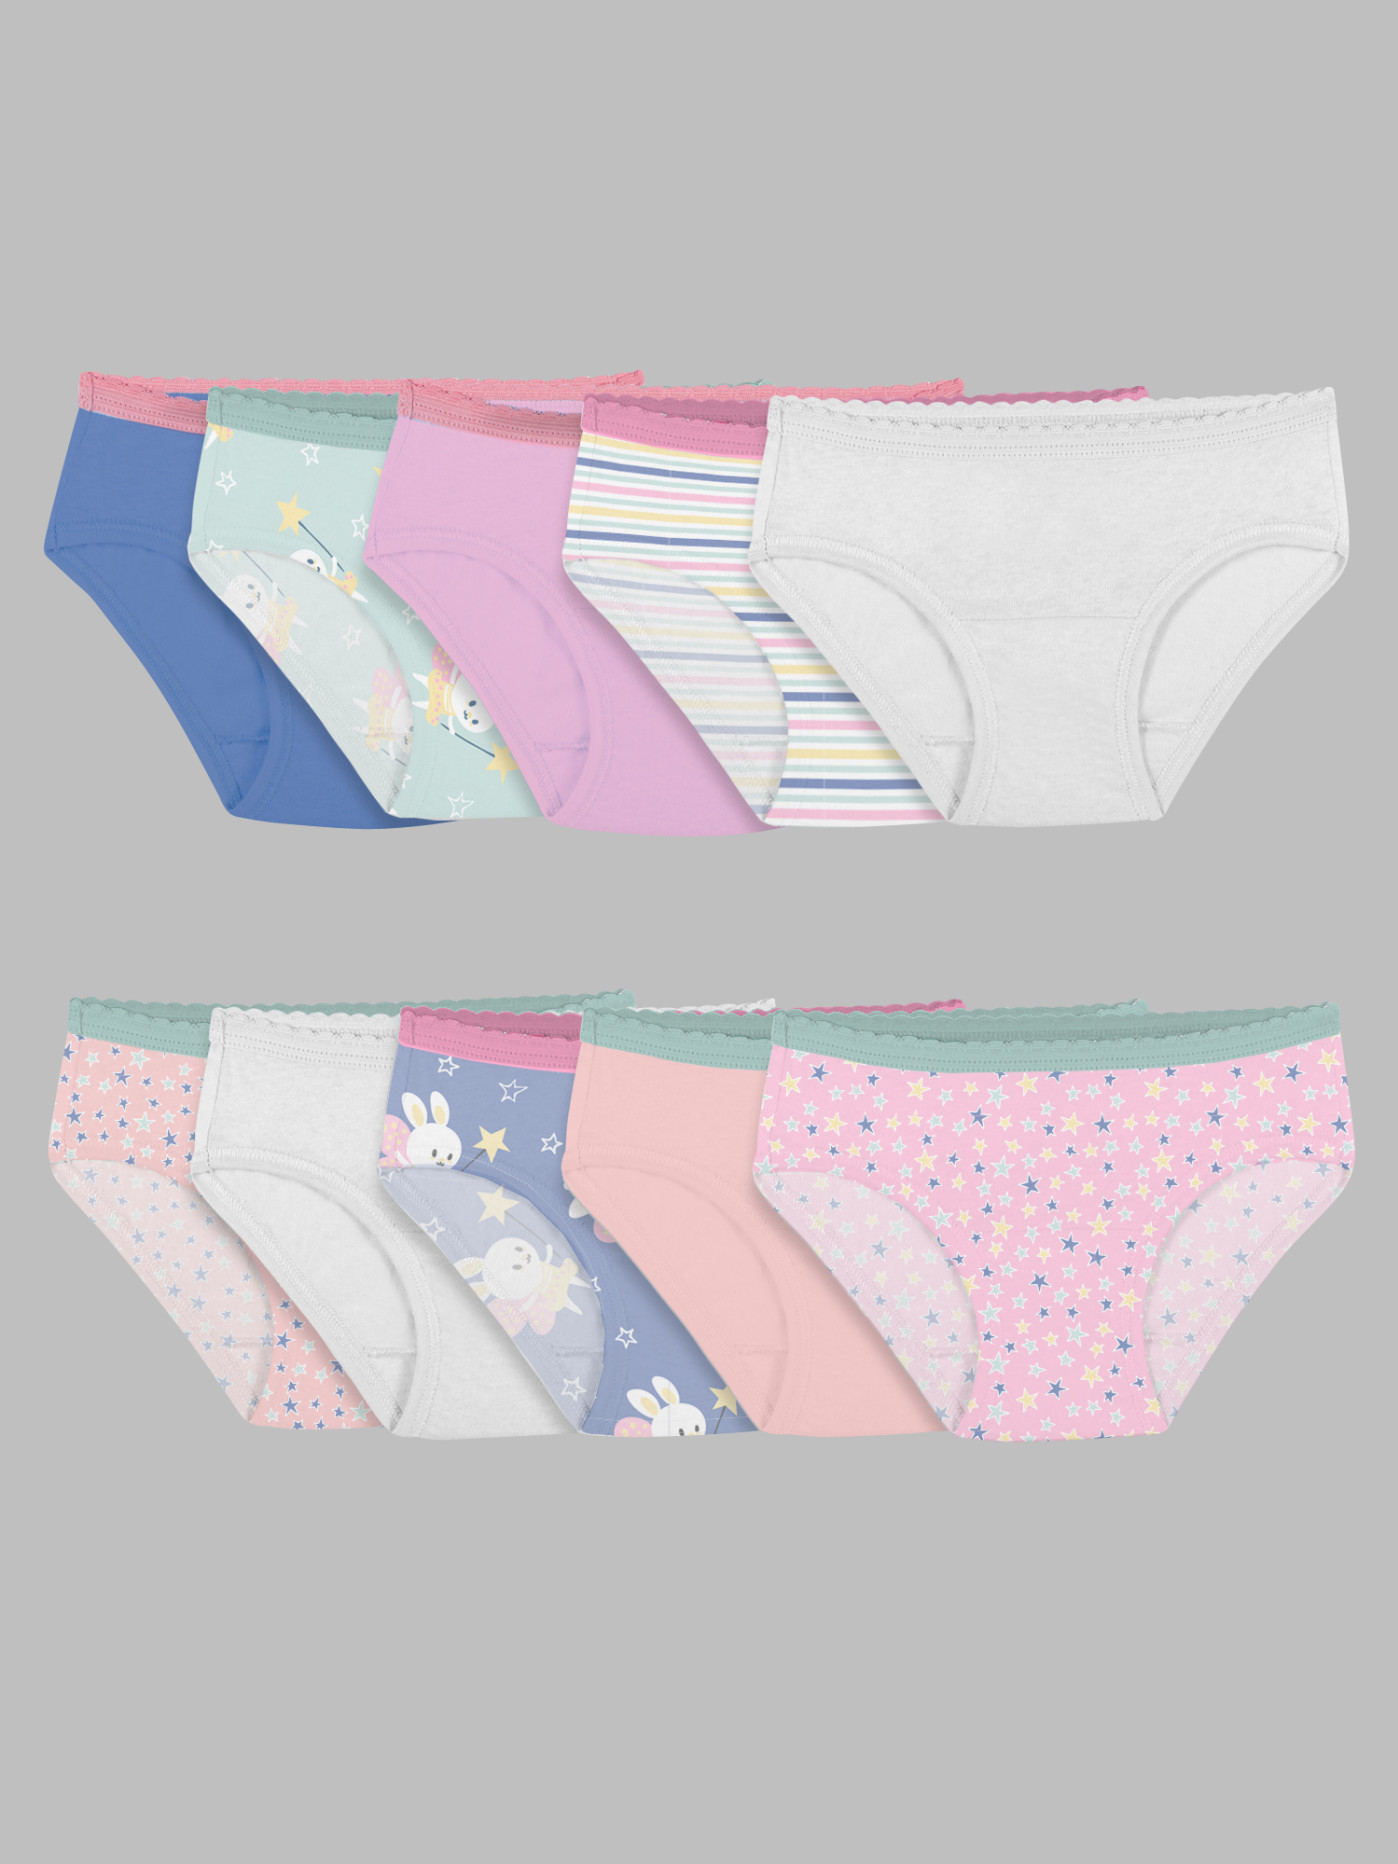 Fruit of the Loom Toddler Girls 10 Pack Assorted Cotton Brief Underwear,  4T/5T